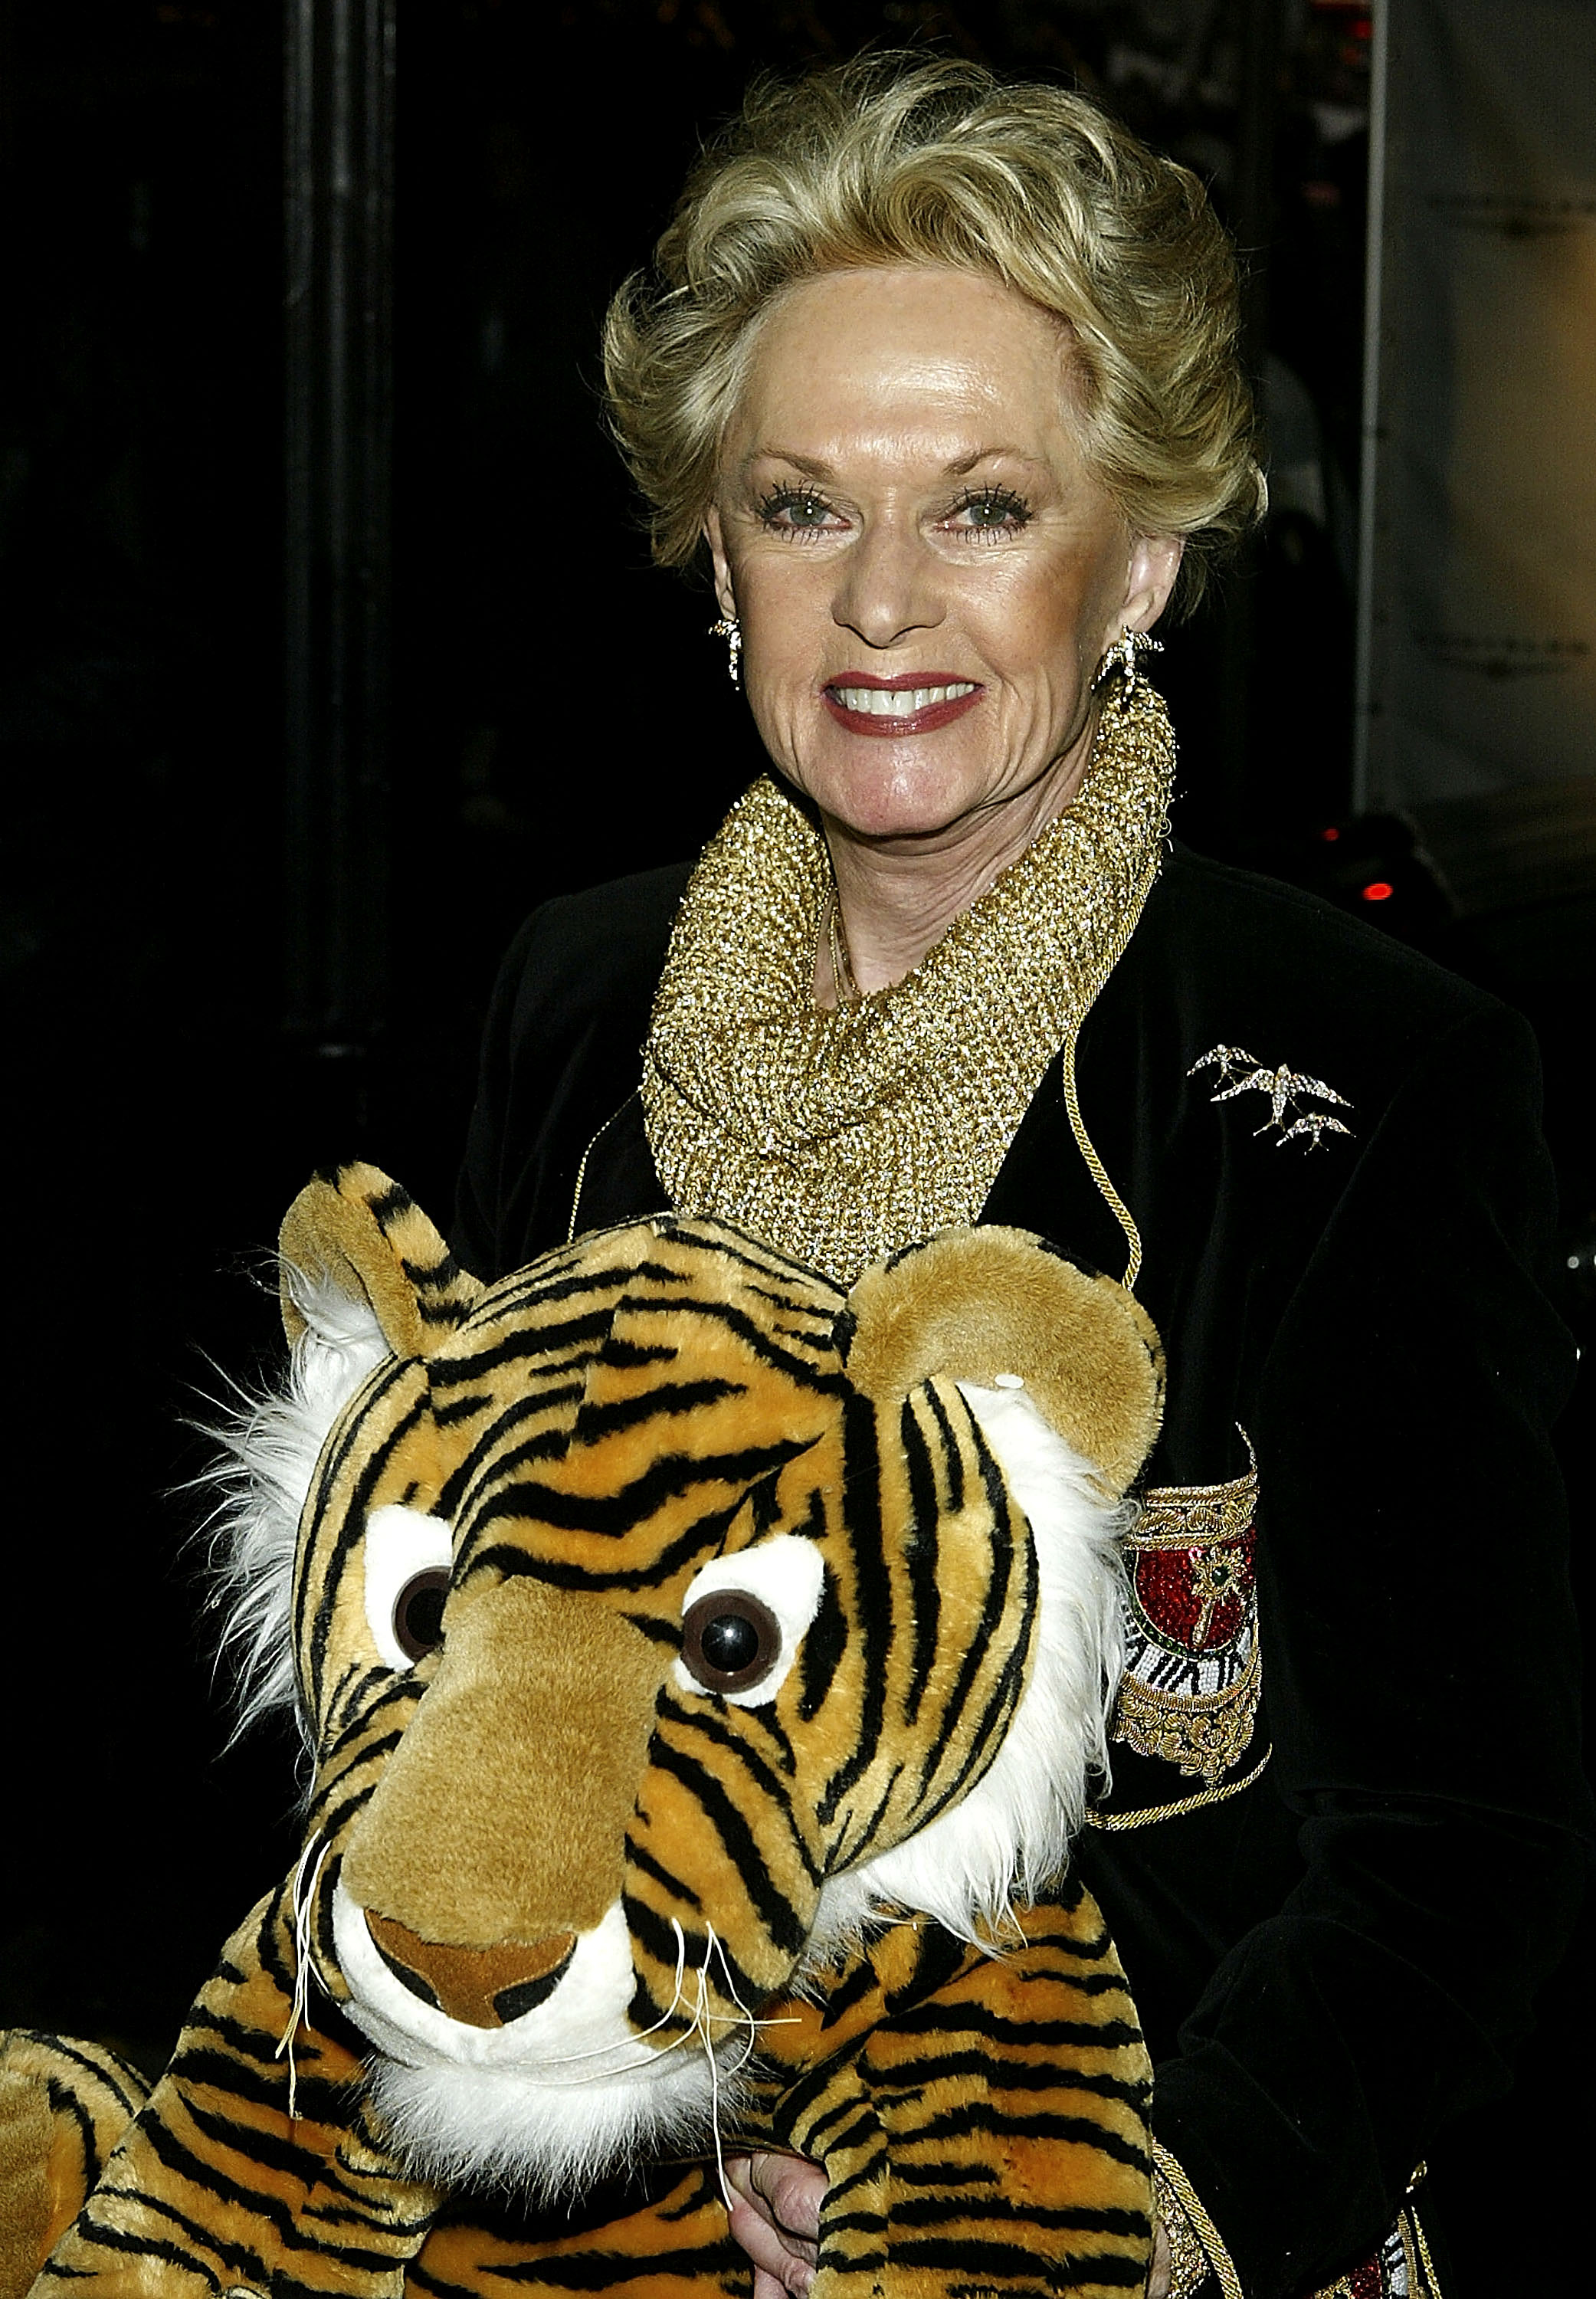 Tippi Hedren poses for a photo before the start of the 72nd Annual Hollywood Christmas Parade in Los Angeles, California, November 30, 2003. | Source: Getty Images